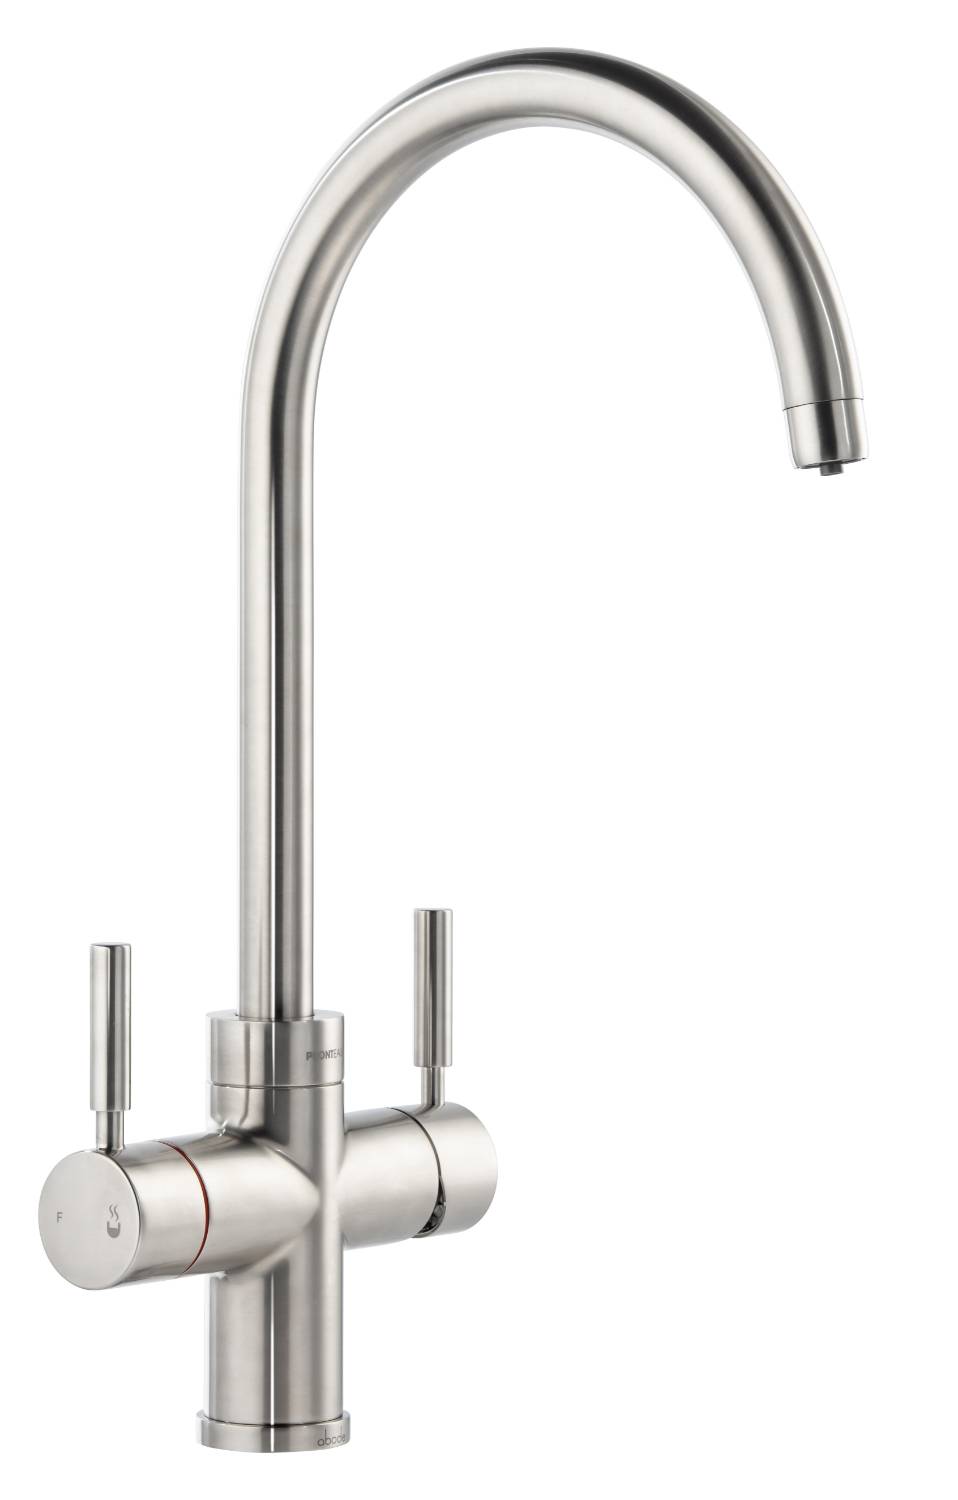 PRONTEAU™ Propure (Swan Spout) - 4 in 1 Steaming Hot Water Tap - Boiling Water Tap